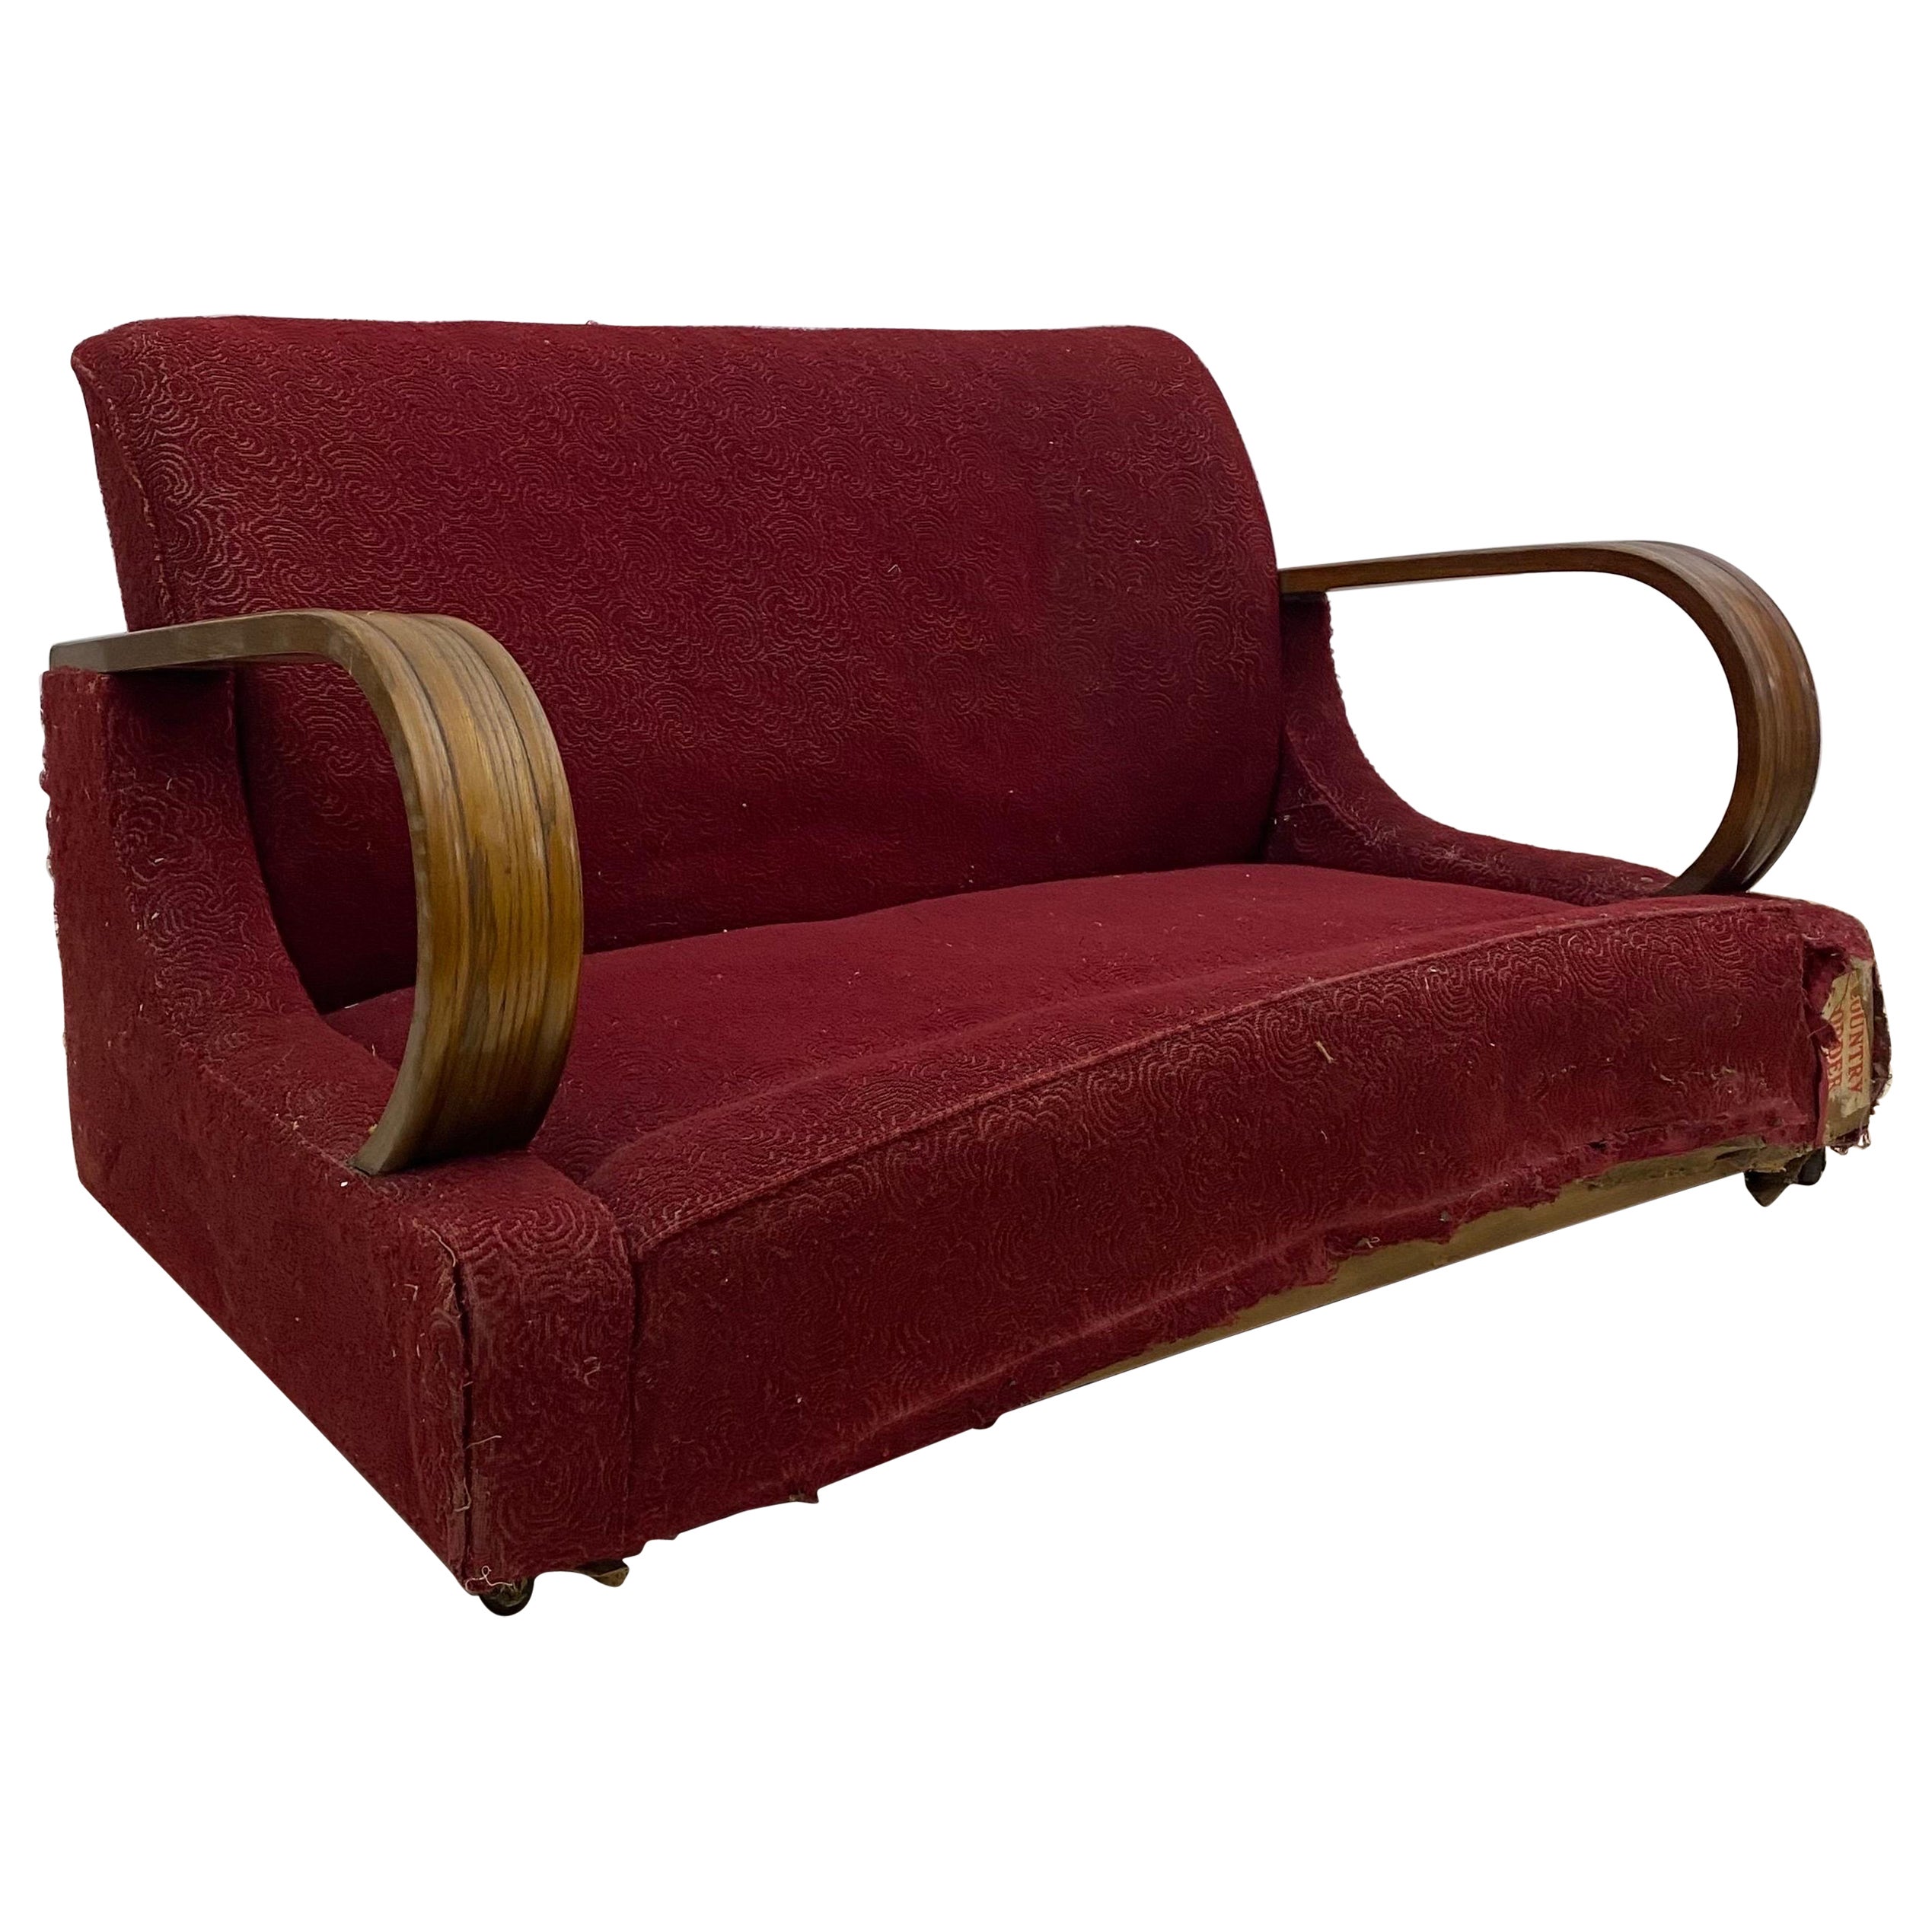 Art Deco 1940s Red Two Seater Distressed Sofa Restoration Project As Seen Poirot